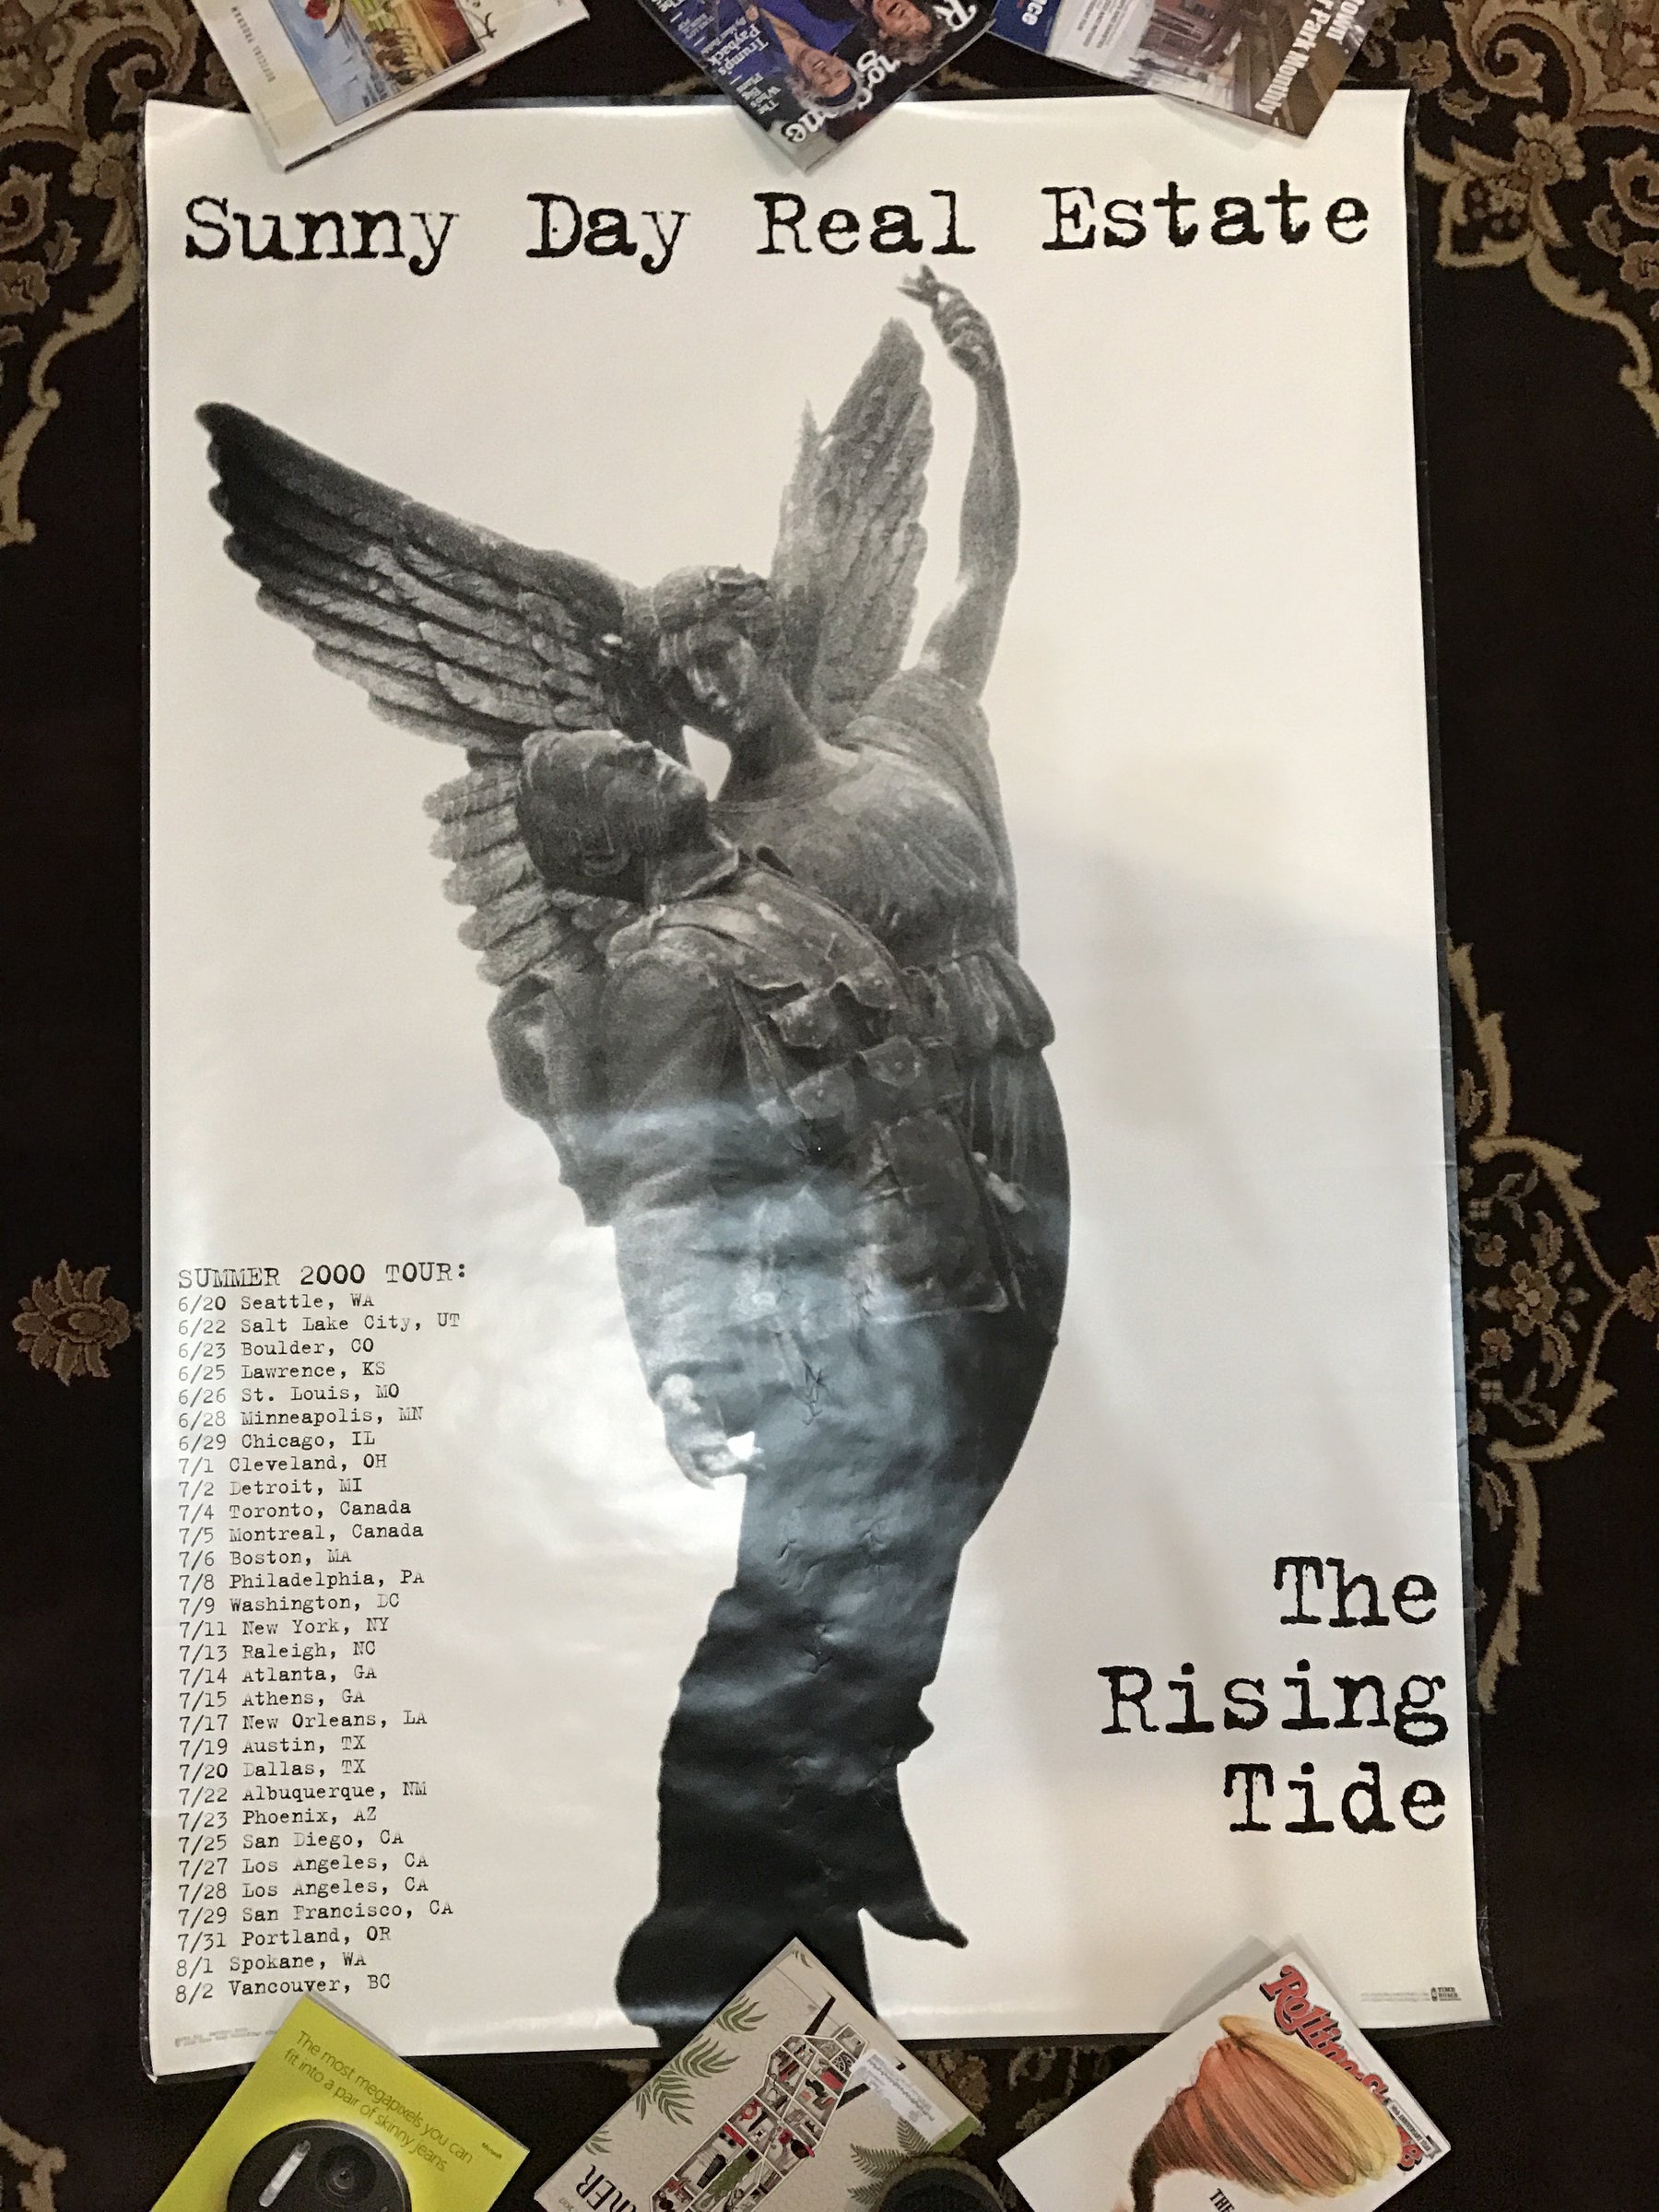 Sunny Day Real Estate 00 Tour Poster The Rising Tide Huge 40x60